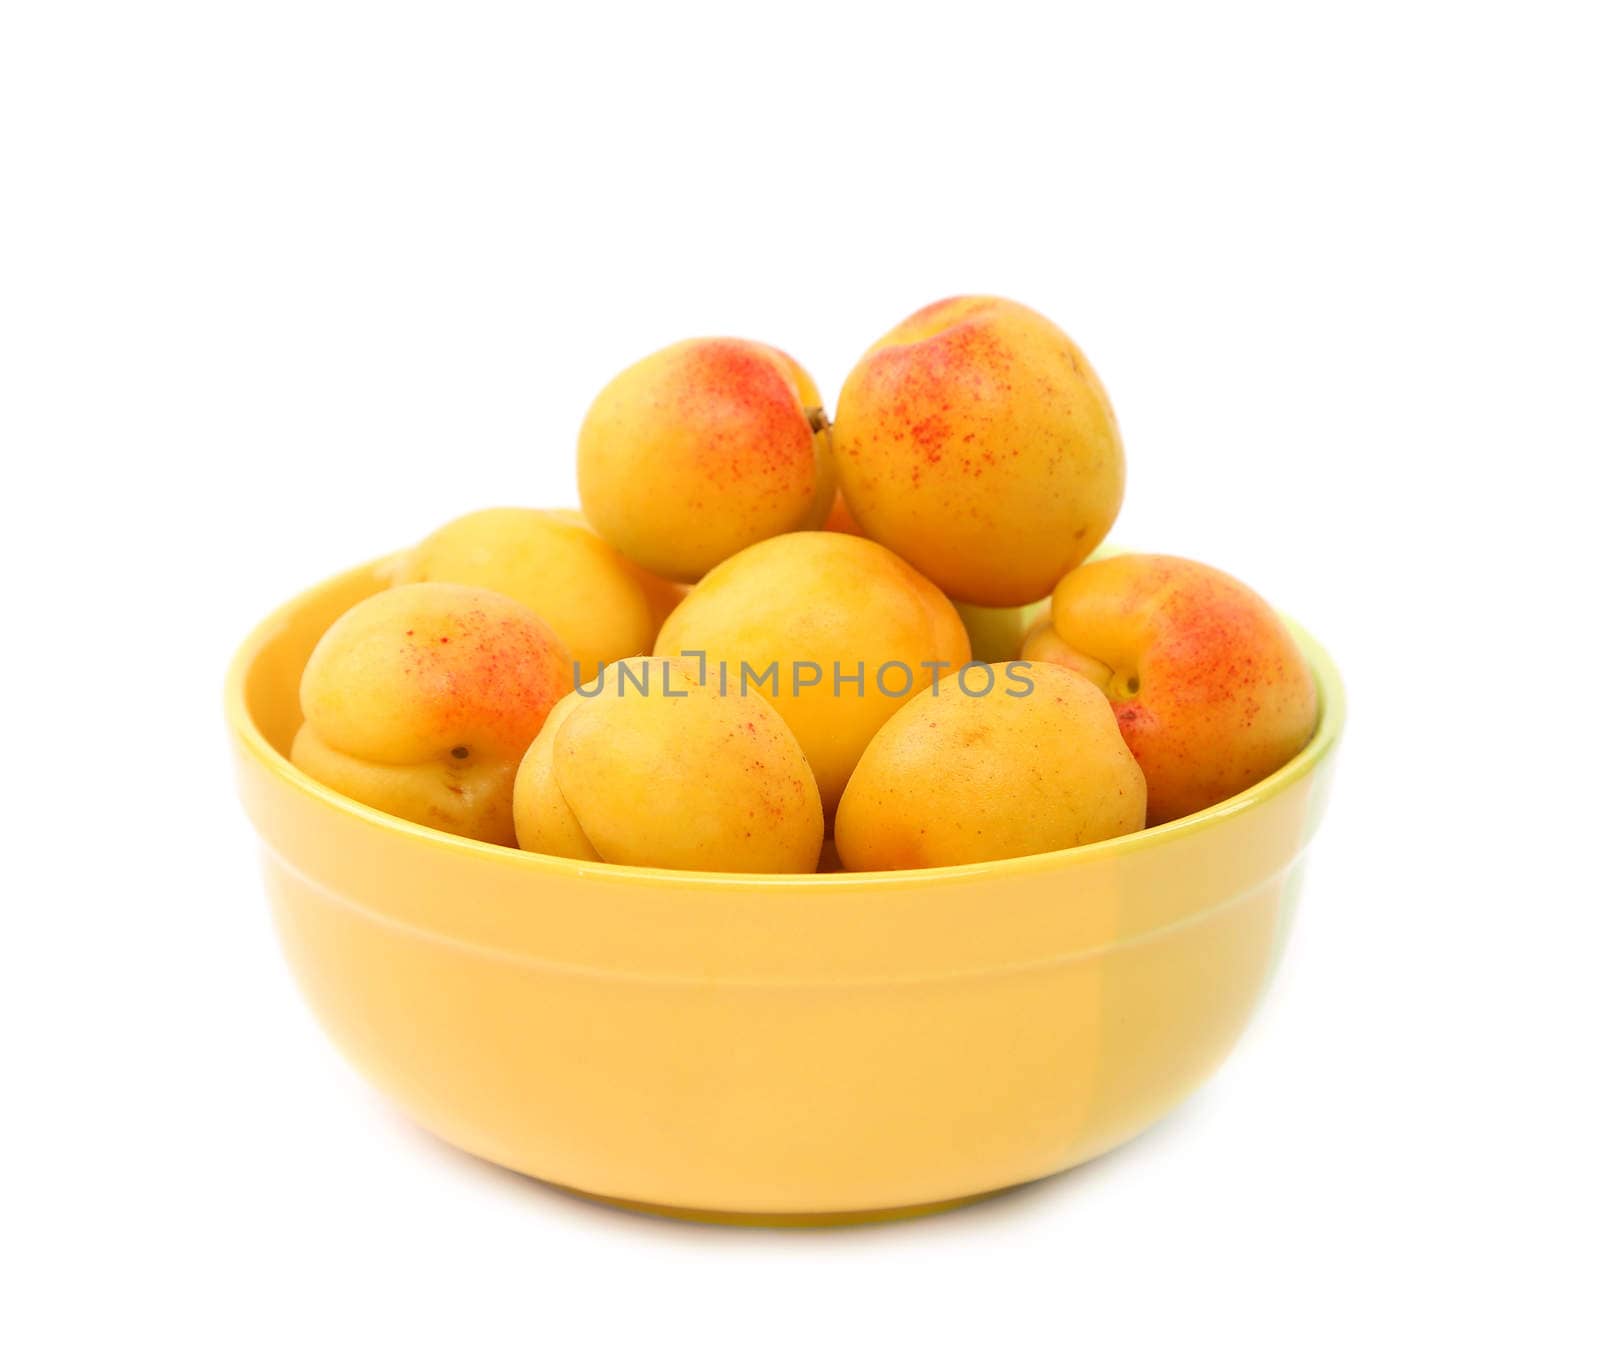 A fresh apricots in the bowl on a white background